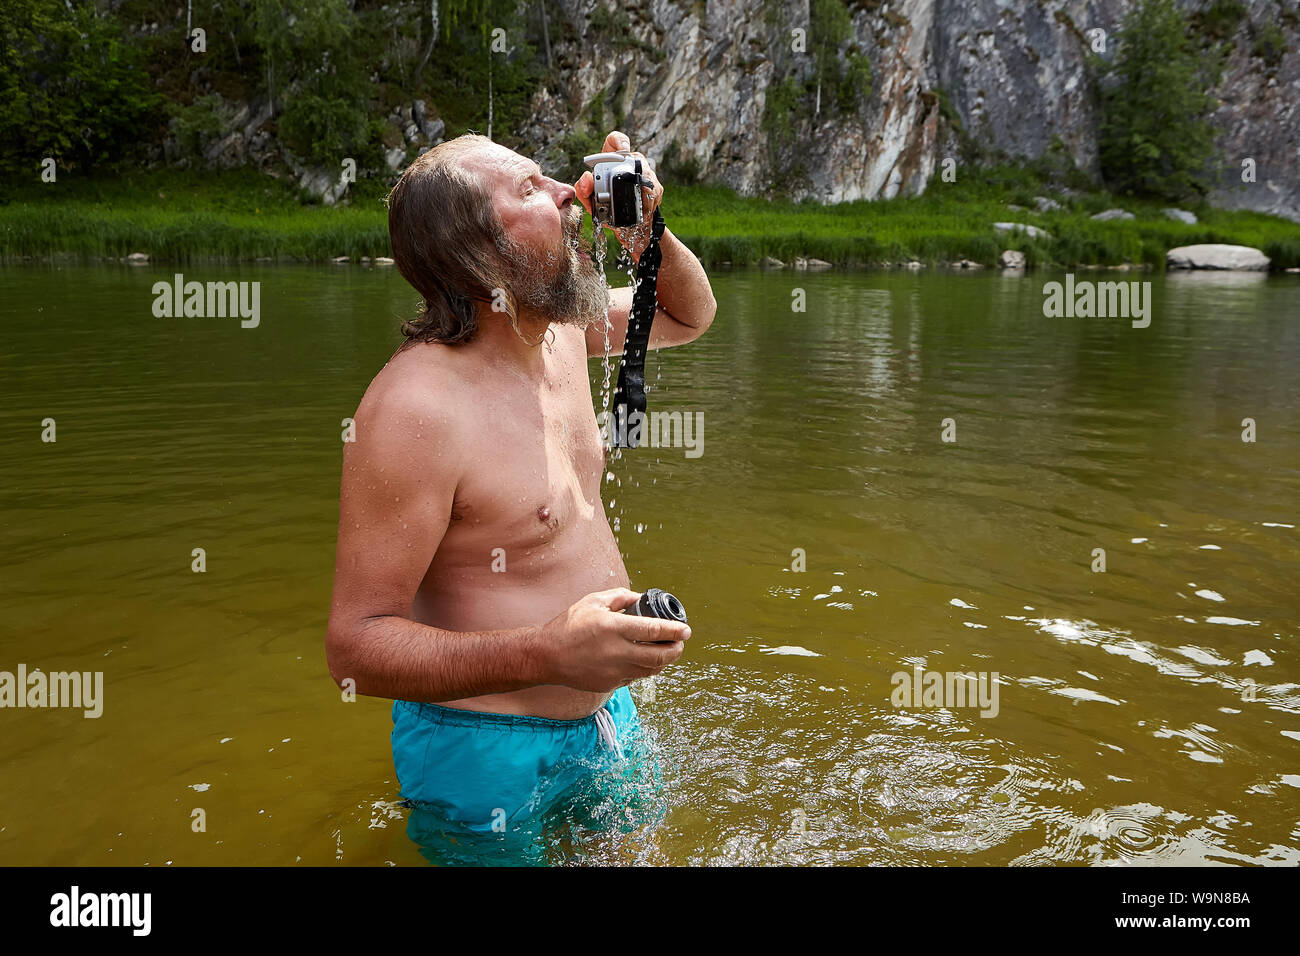 Wet mature bearded man is standing in river with digital camera in his hands. Stock Photo